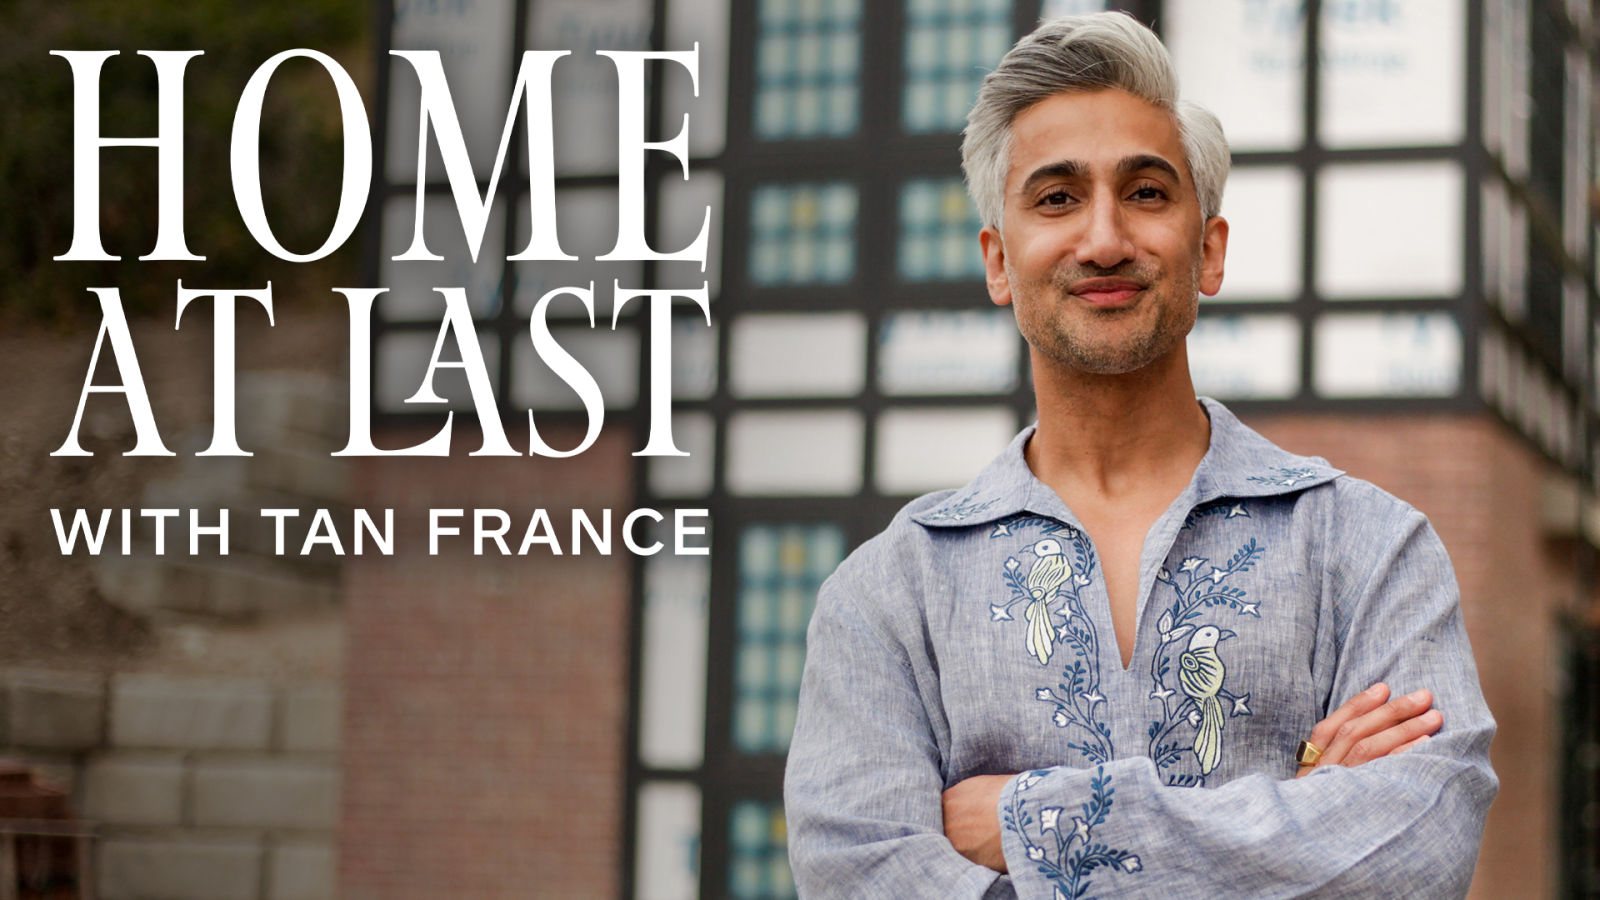 Home at Last With Tan France: Landscaping & Exterior